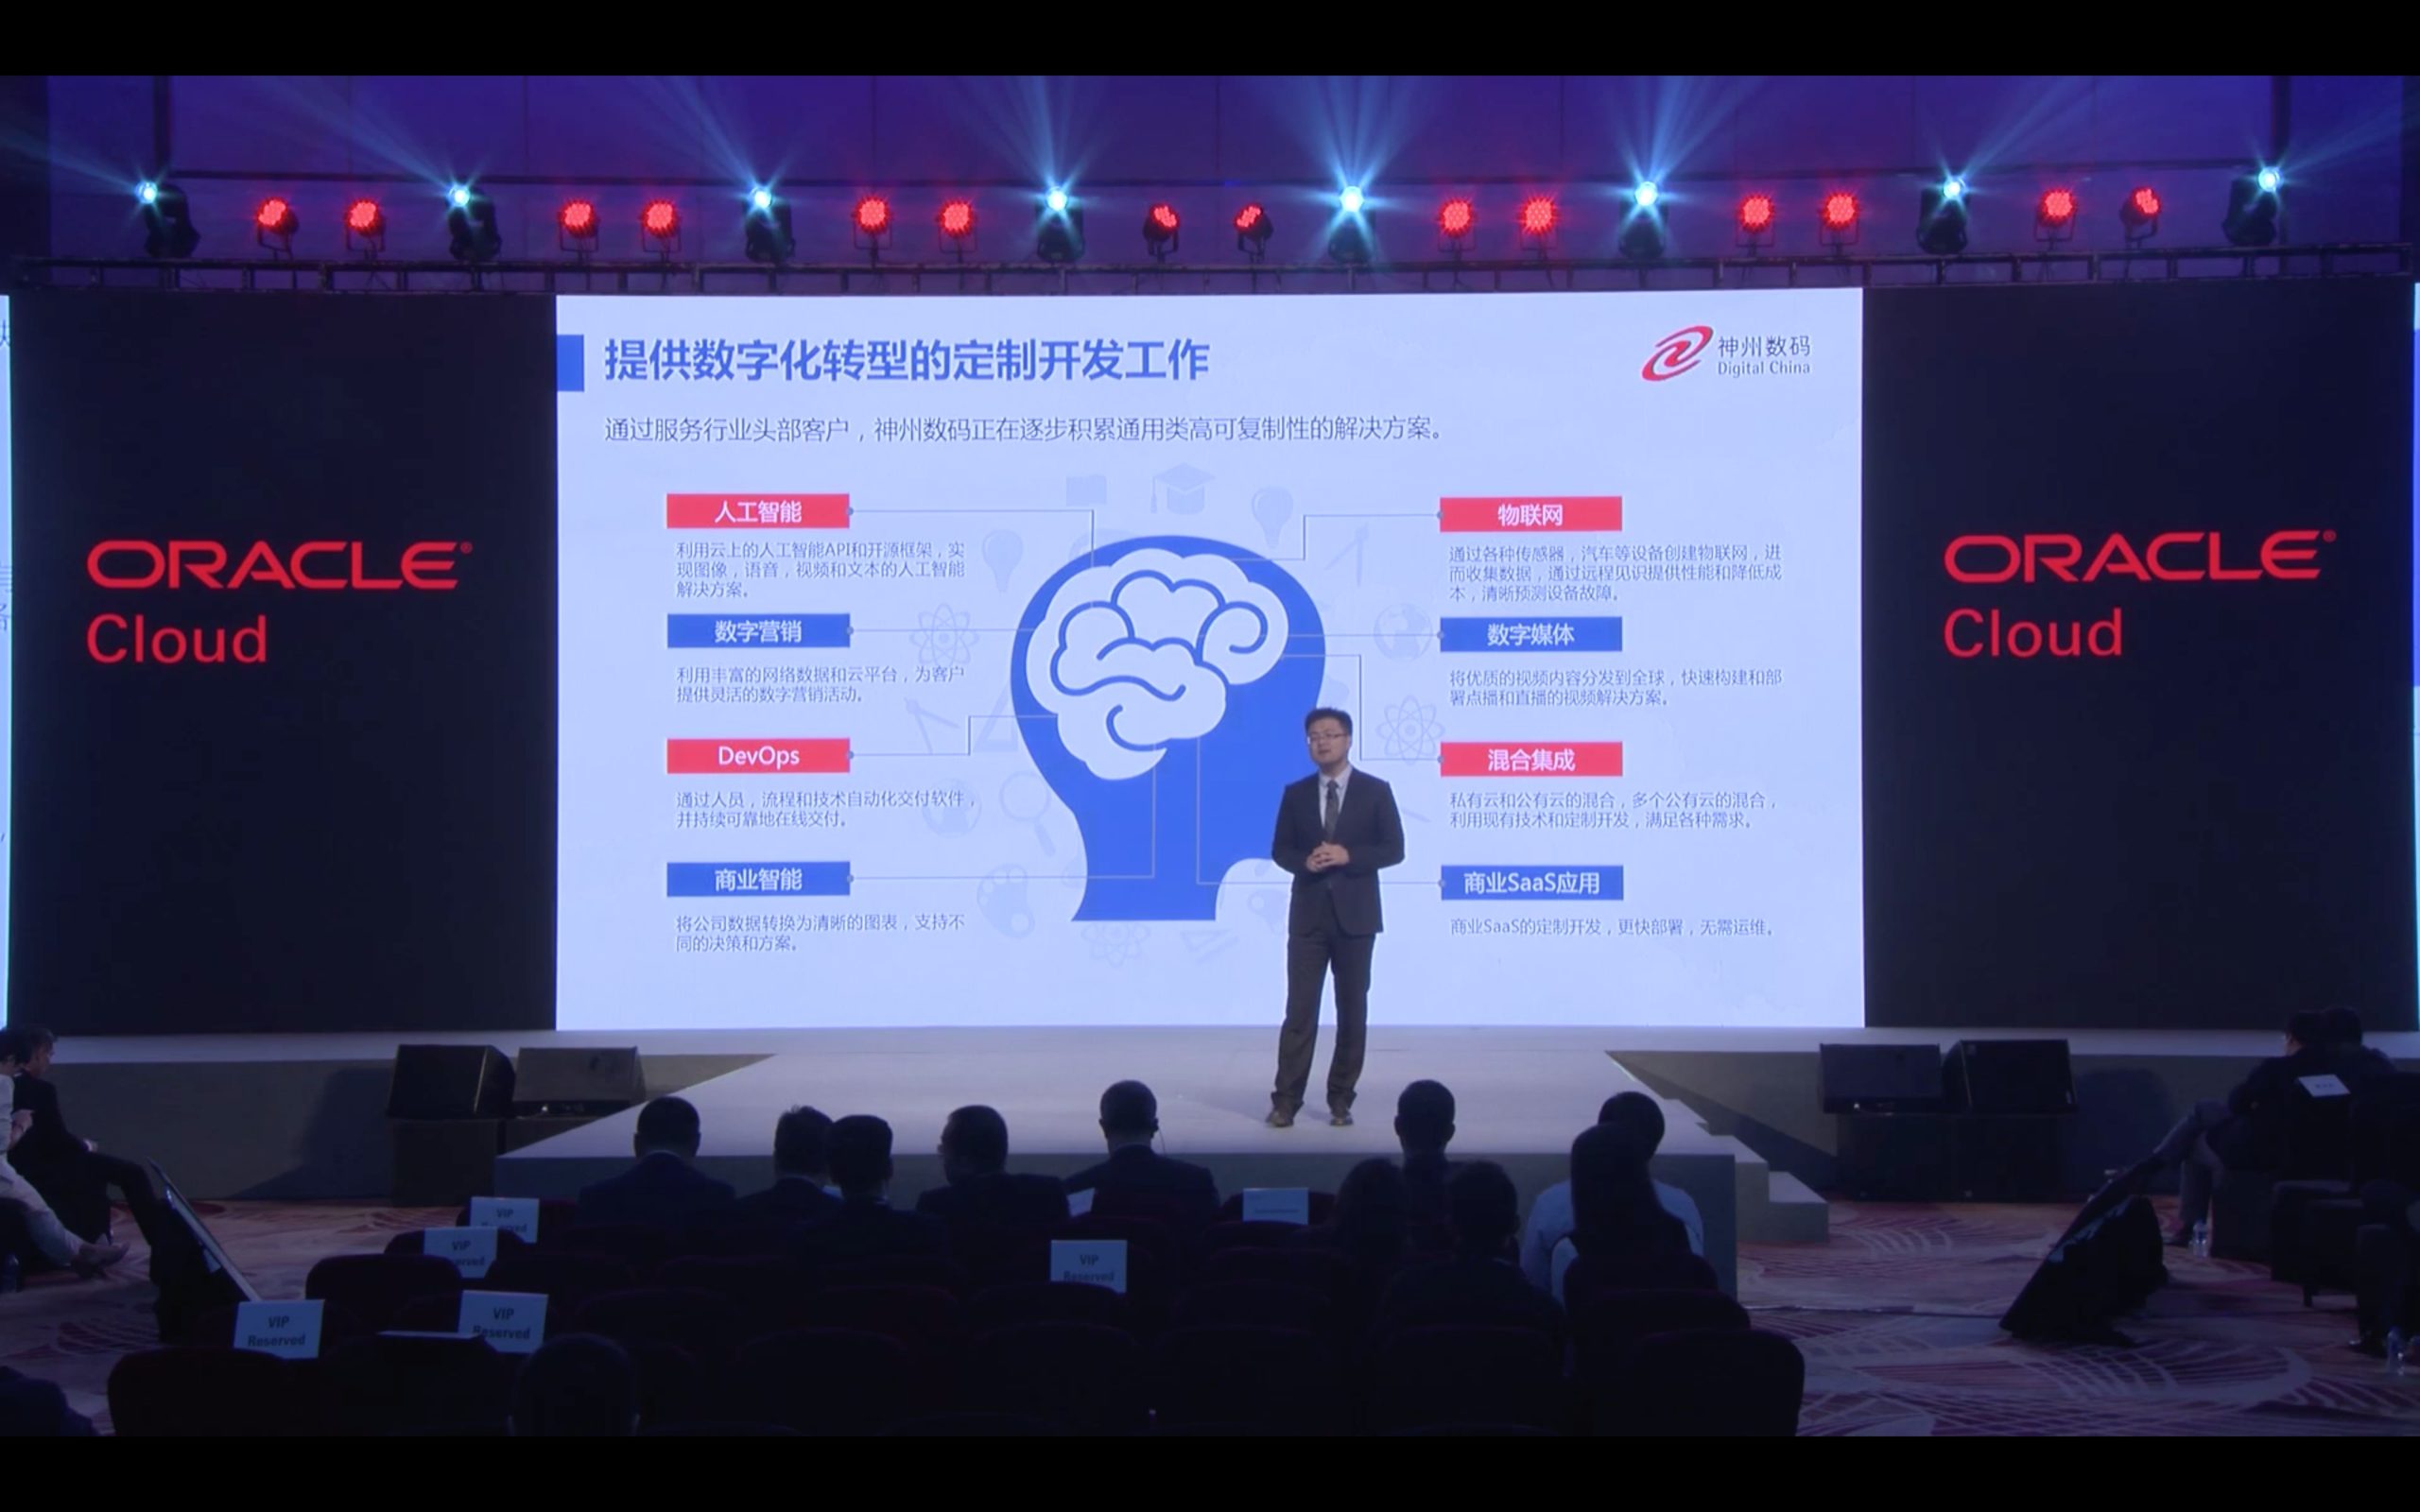 Still from the video on Oracle website. Digital China's CTO Hao Junsheng presenting at Oracle CloudWorld 2018.